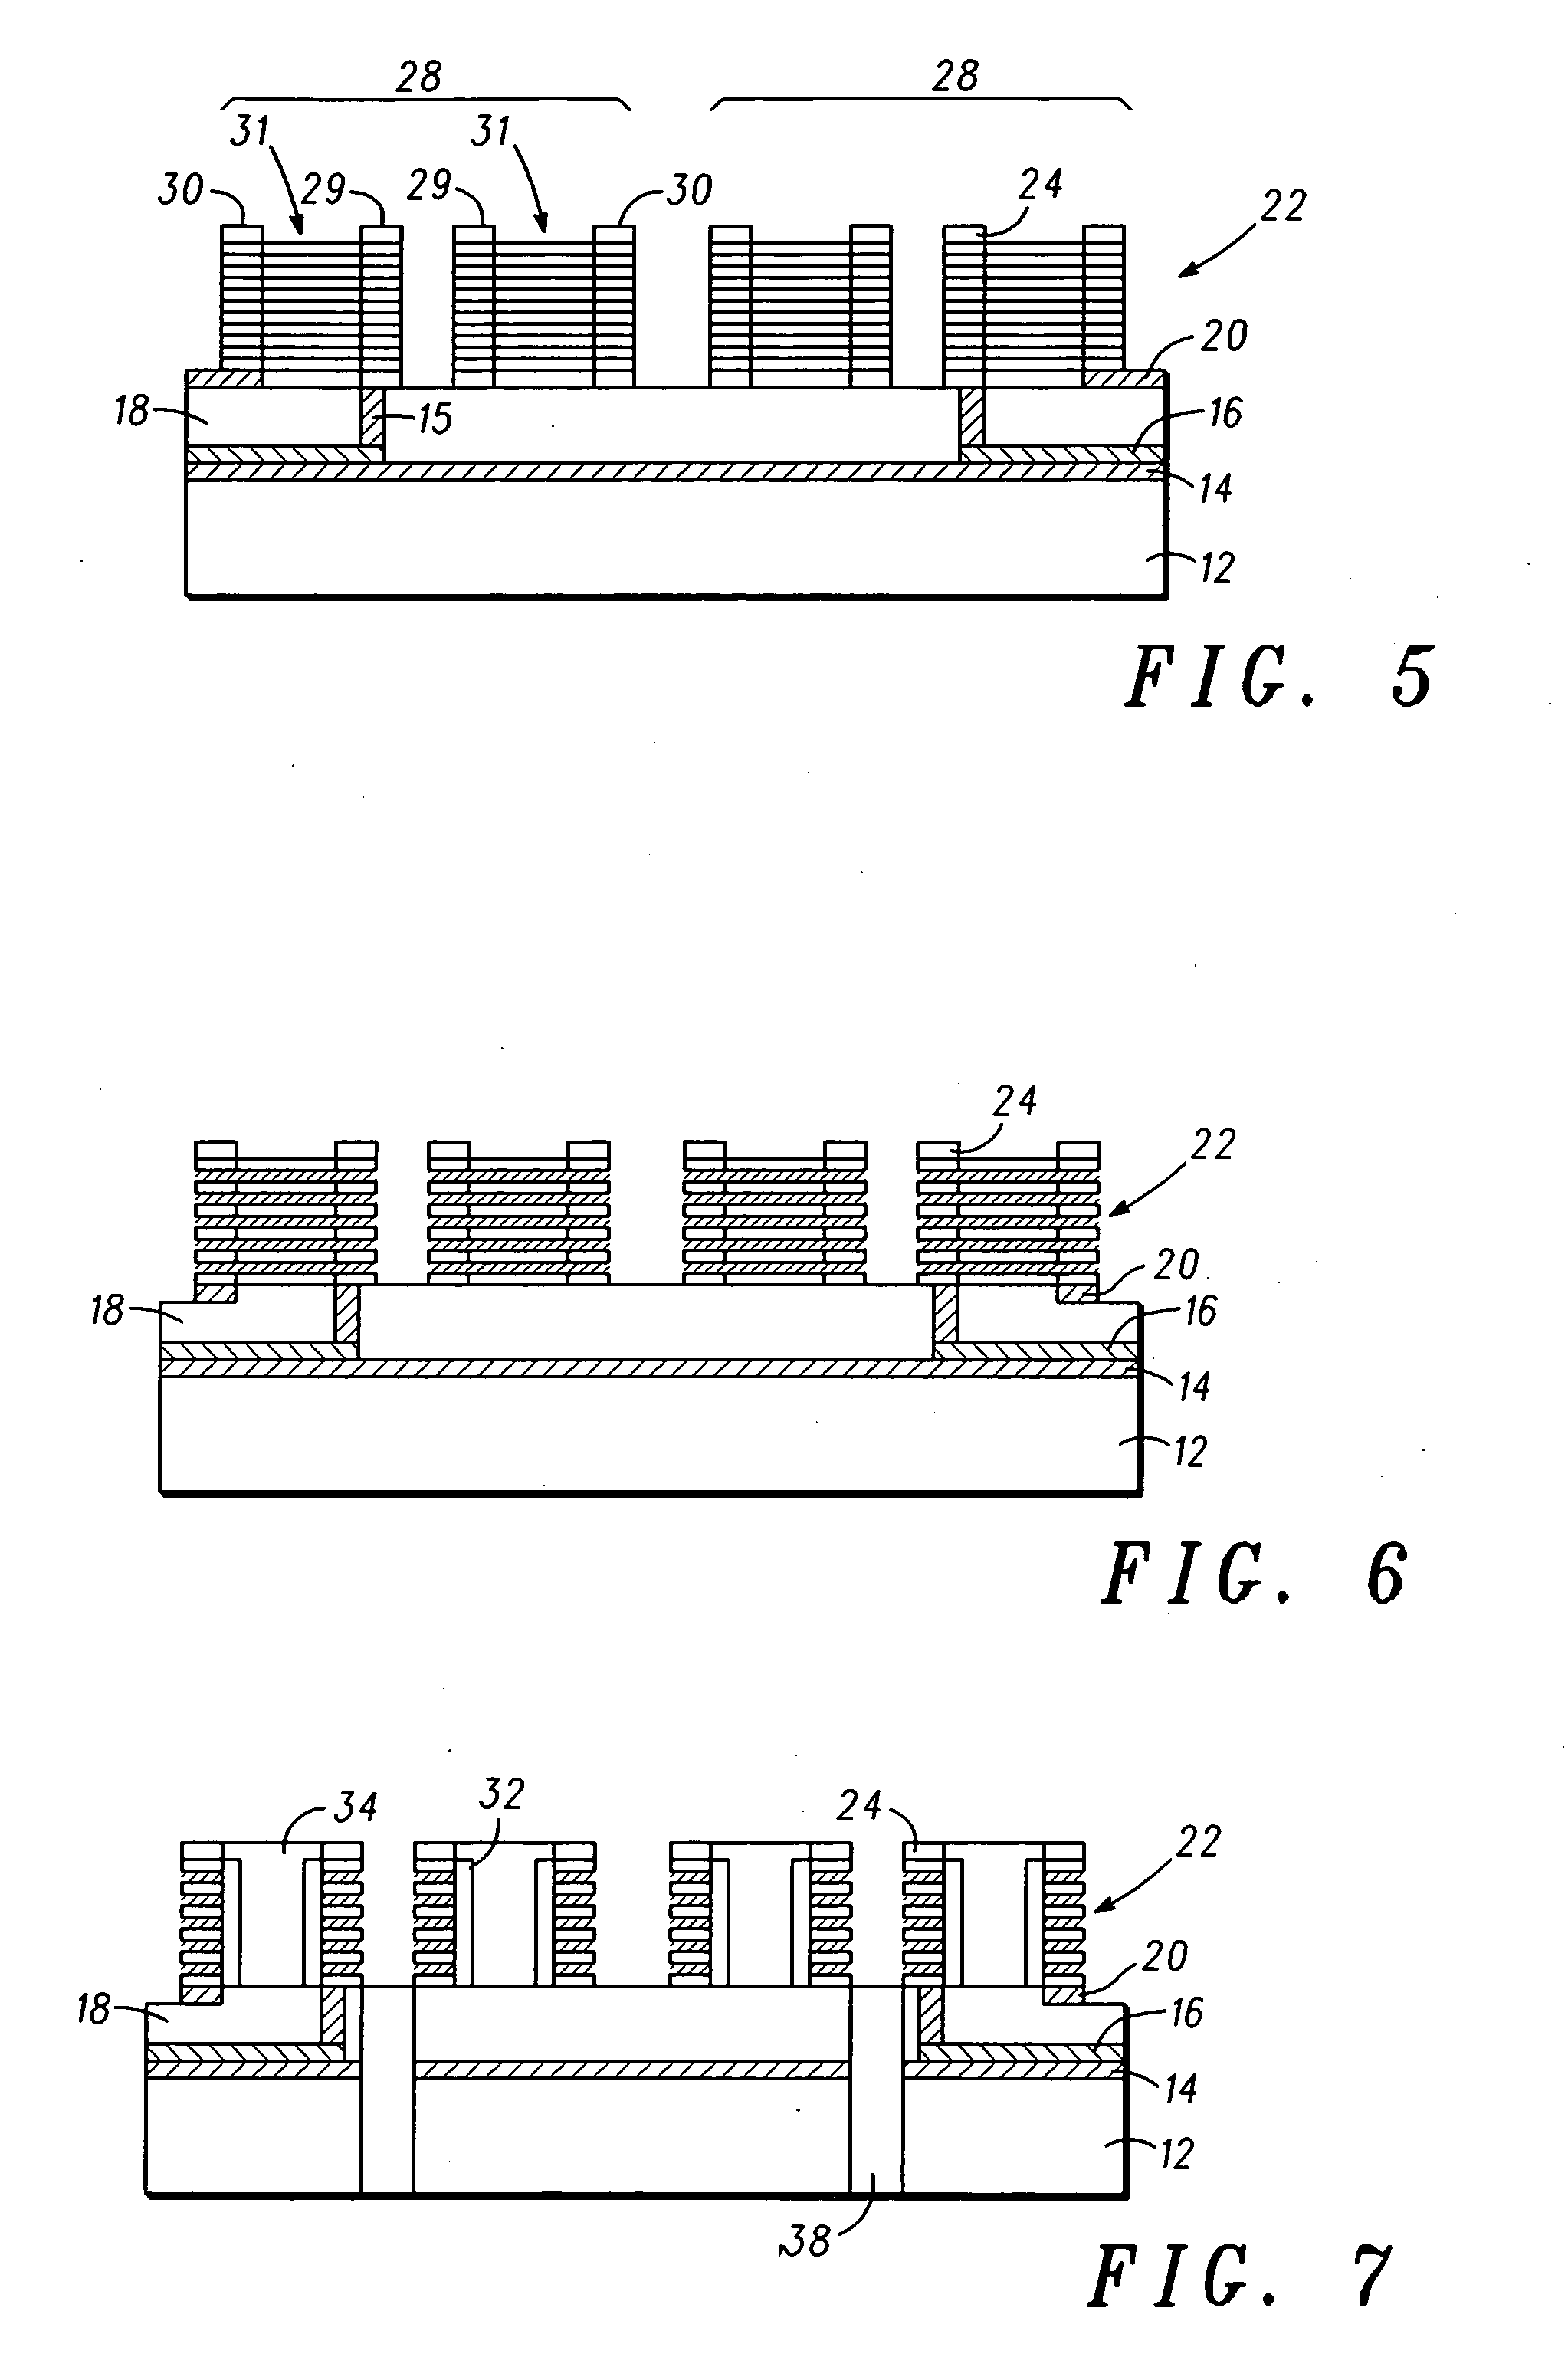 Integrated micro fuel cell apparatus